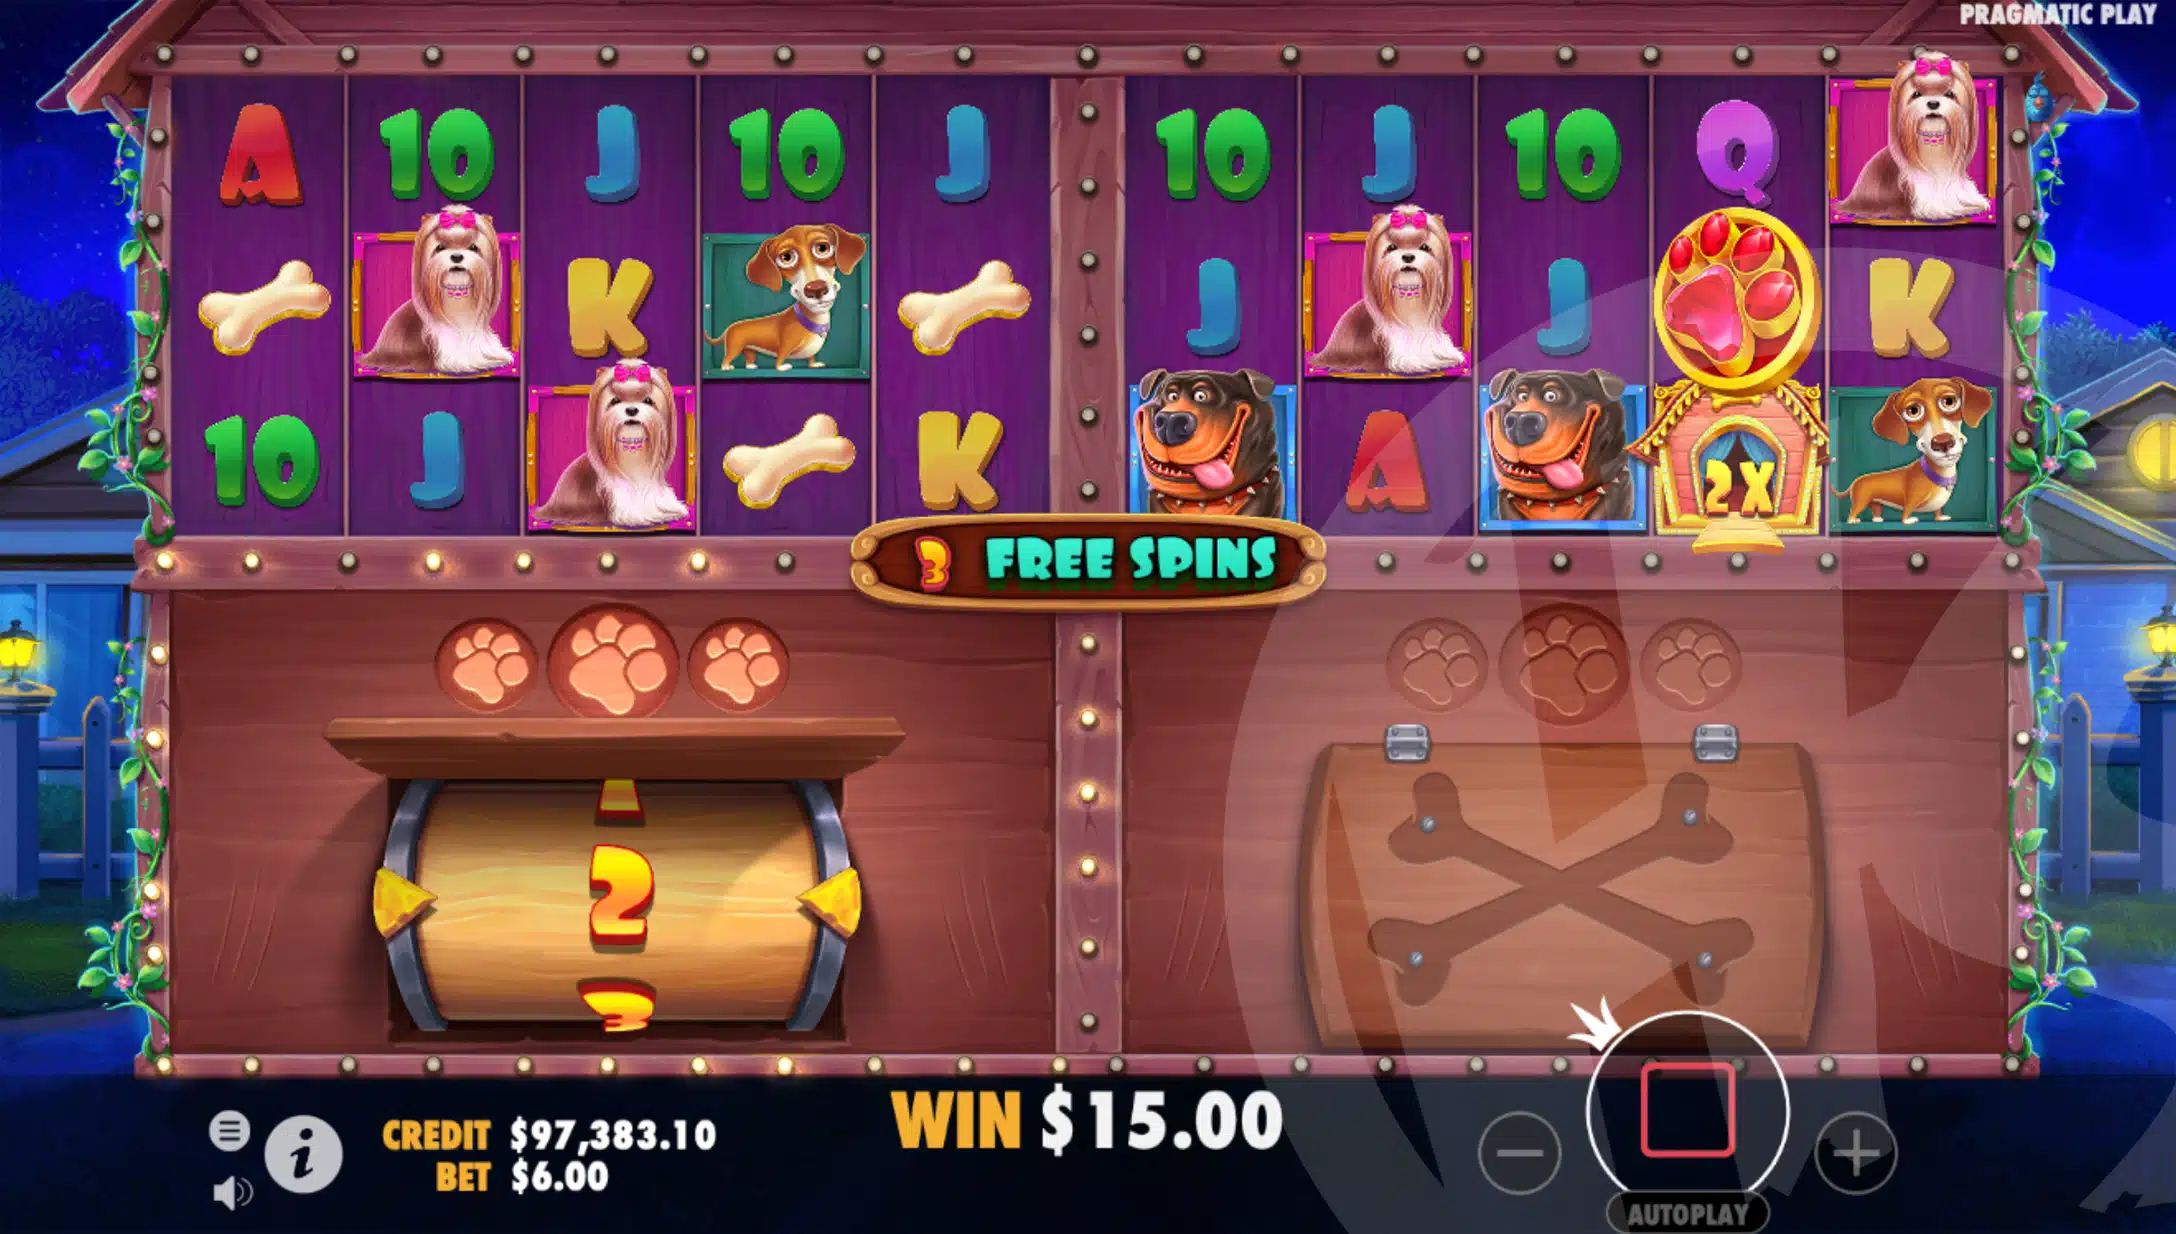 Players Can Unlock Additional Reels During Free Spins